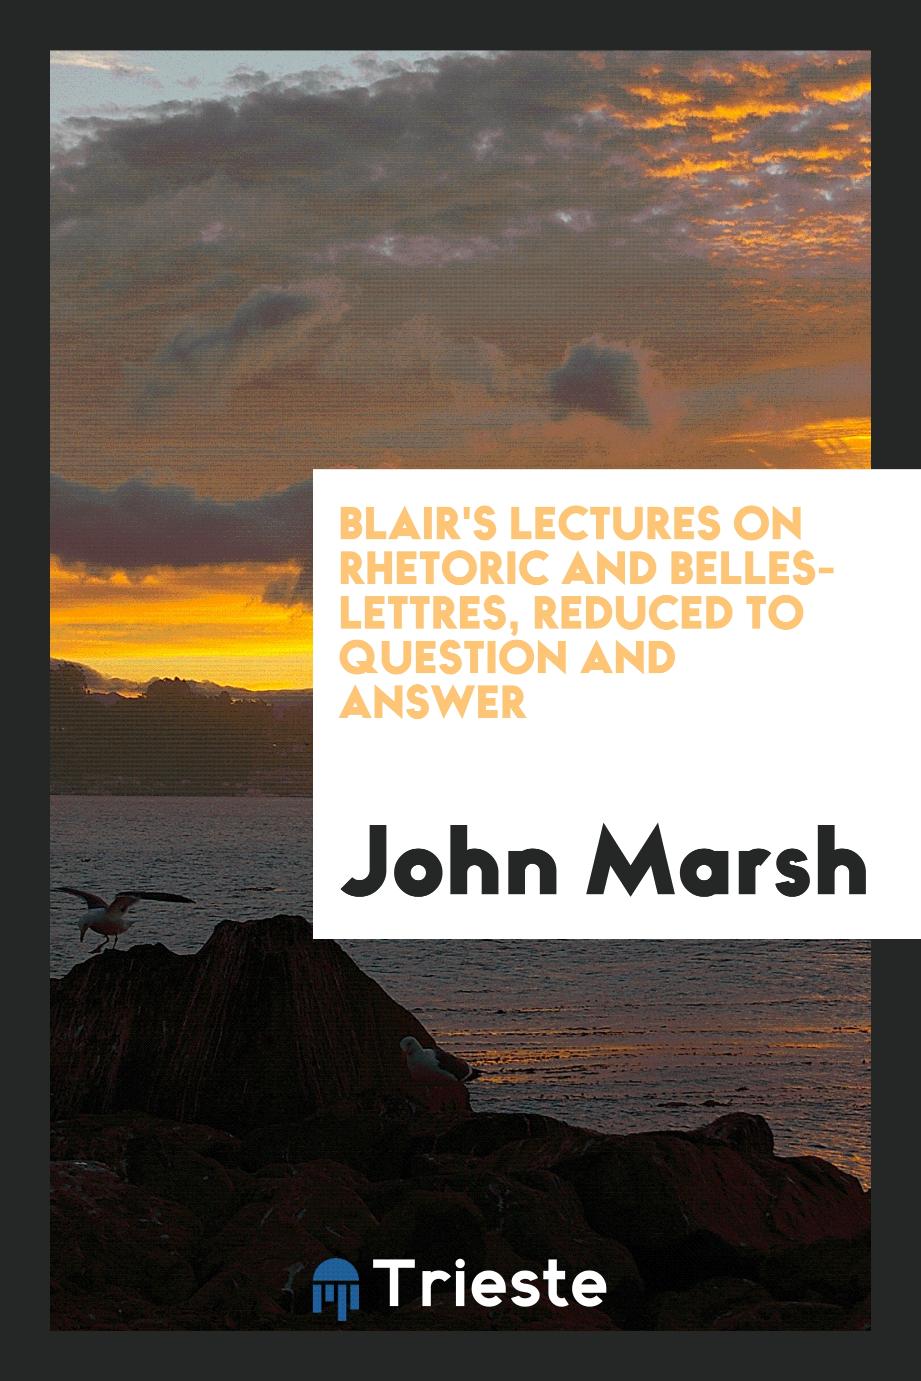 Blair's Lectures on Rhetoric and Belles-Lettres, Reduced to Question and Answer